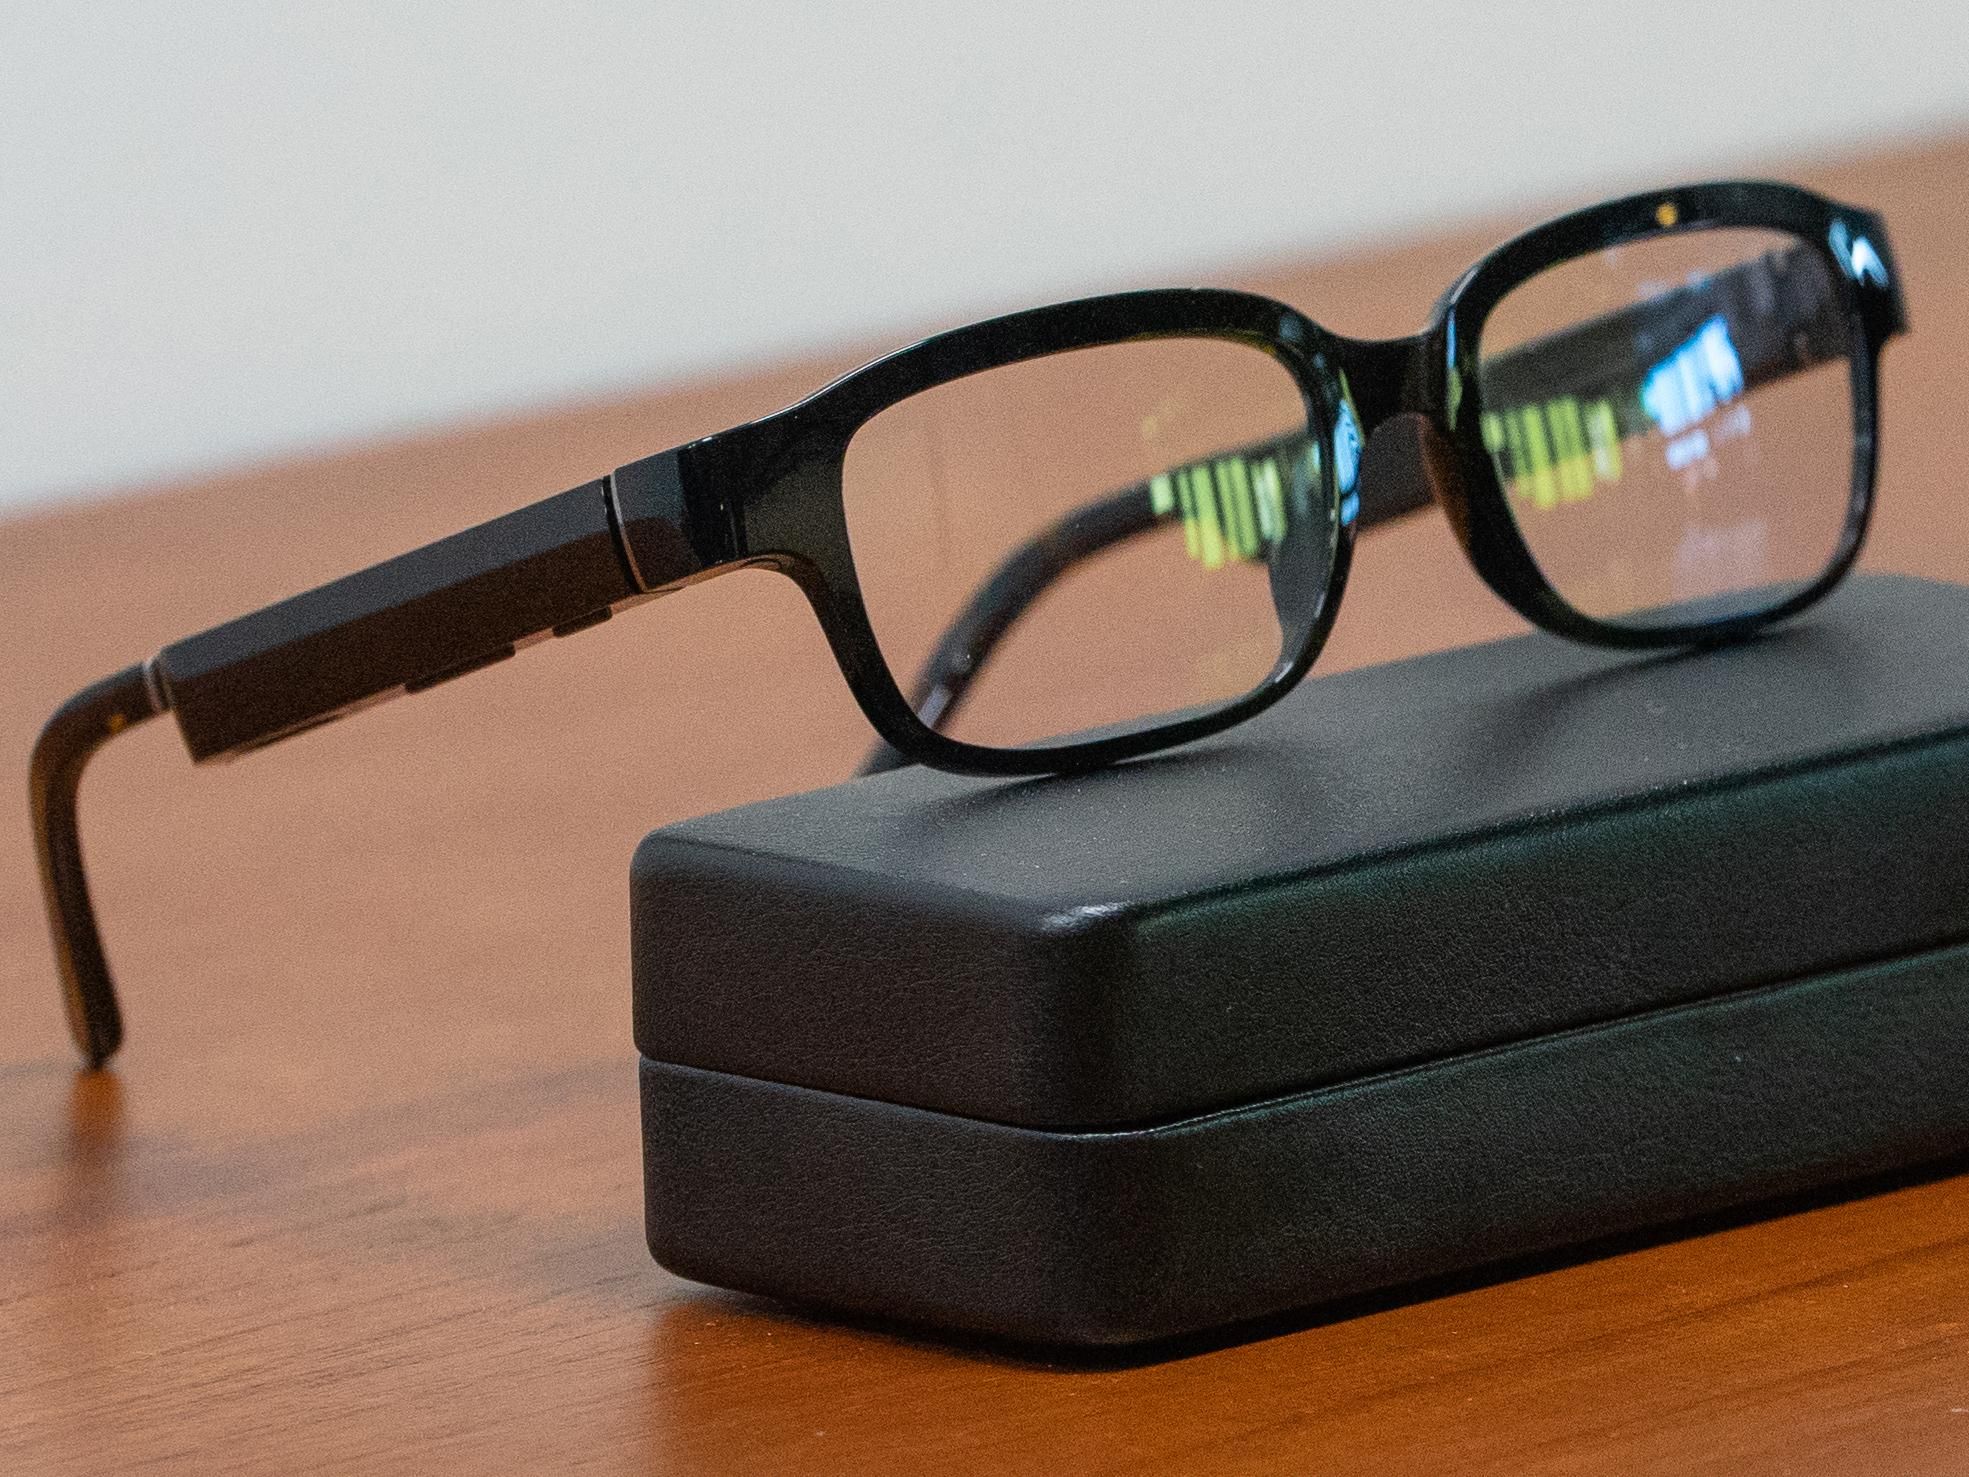 Glasses sitting on a case